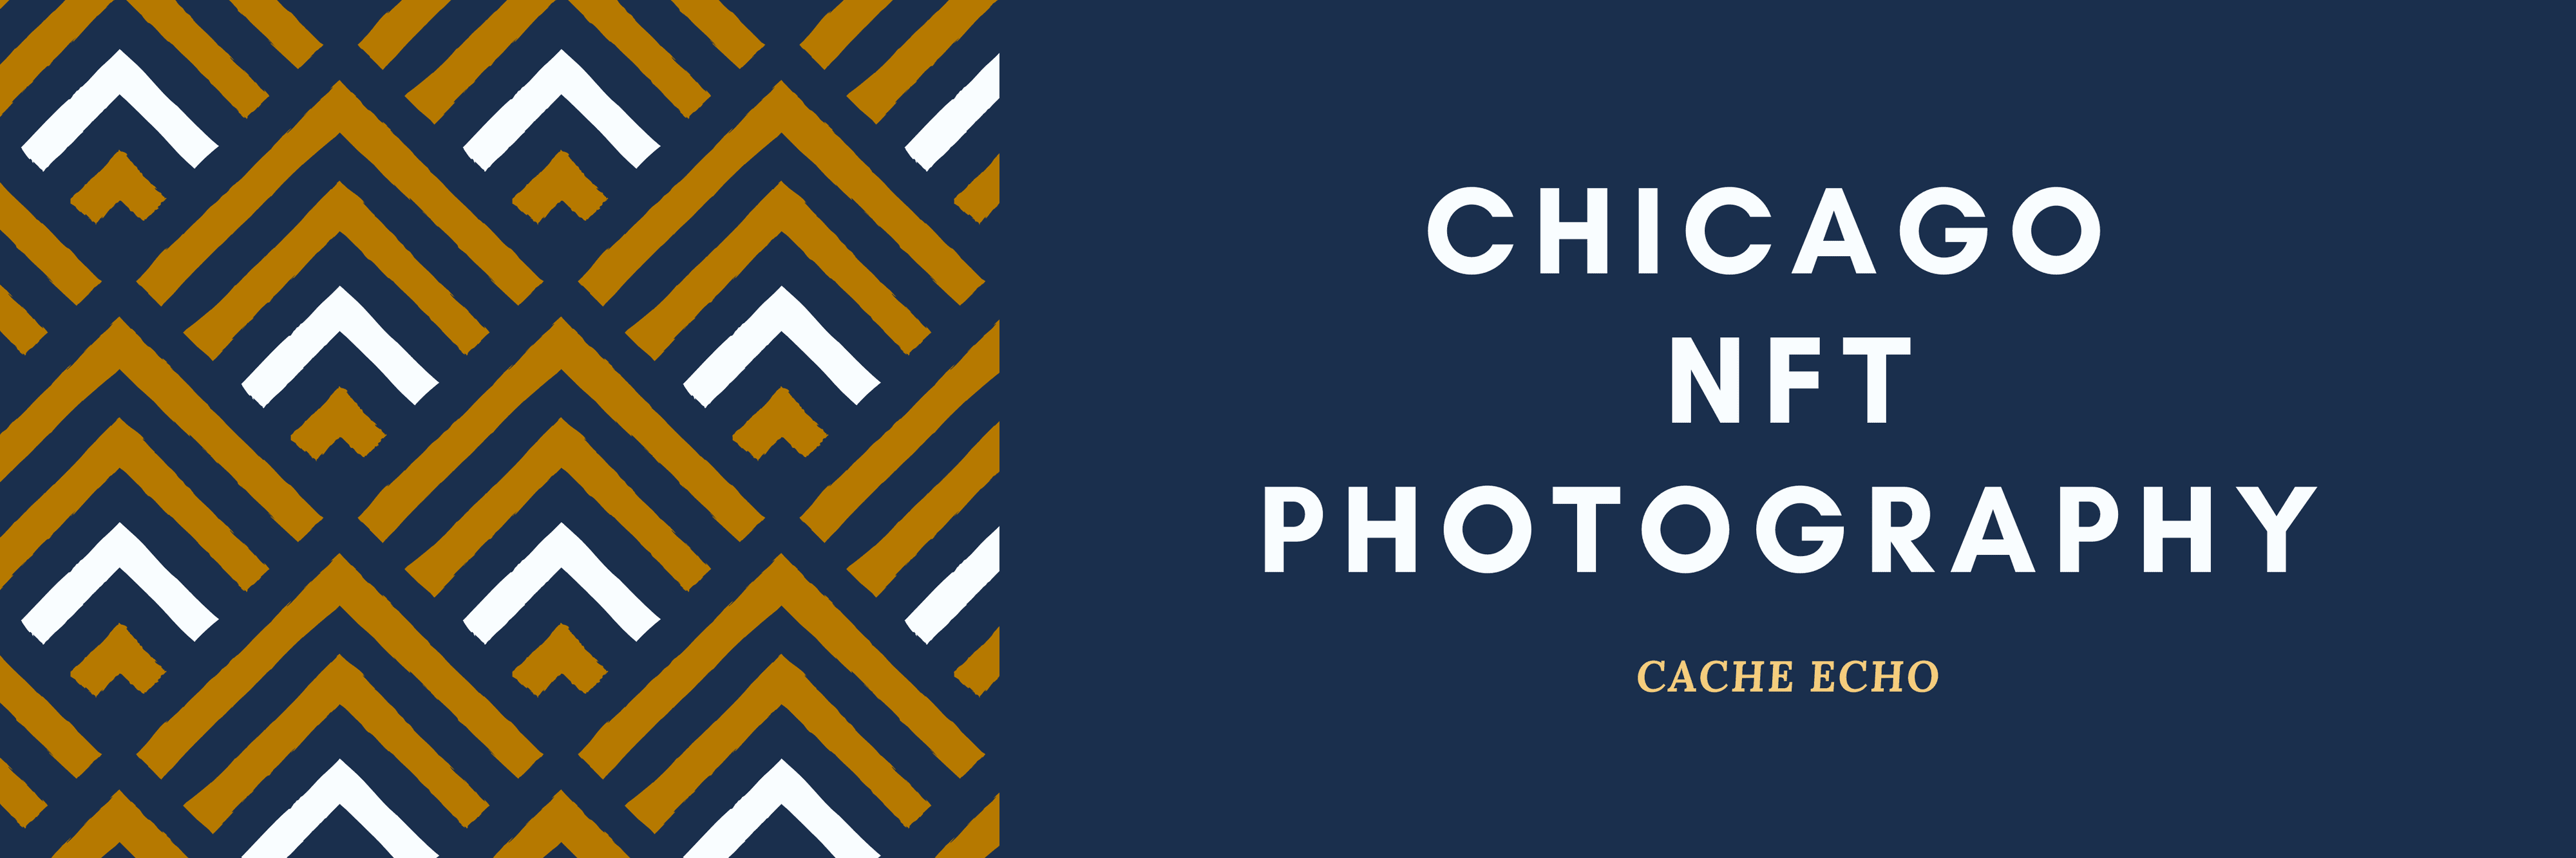 ChicagoNFTPhotography banner